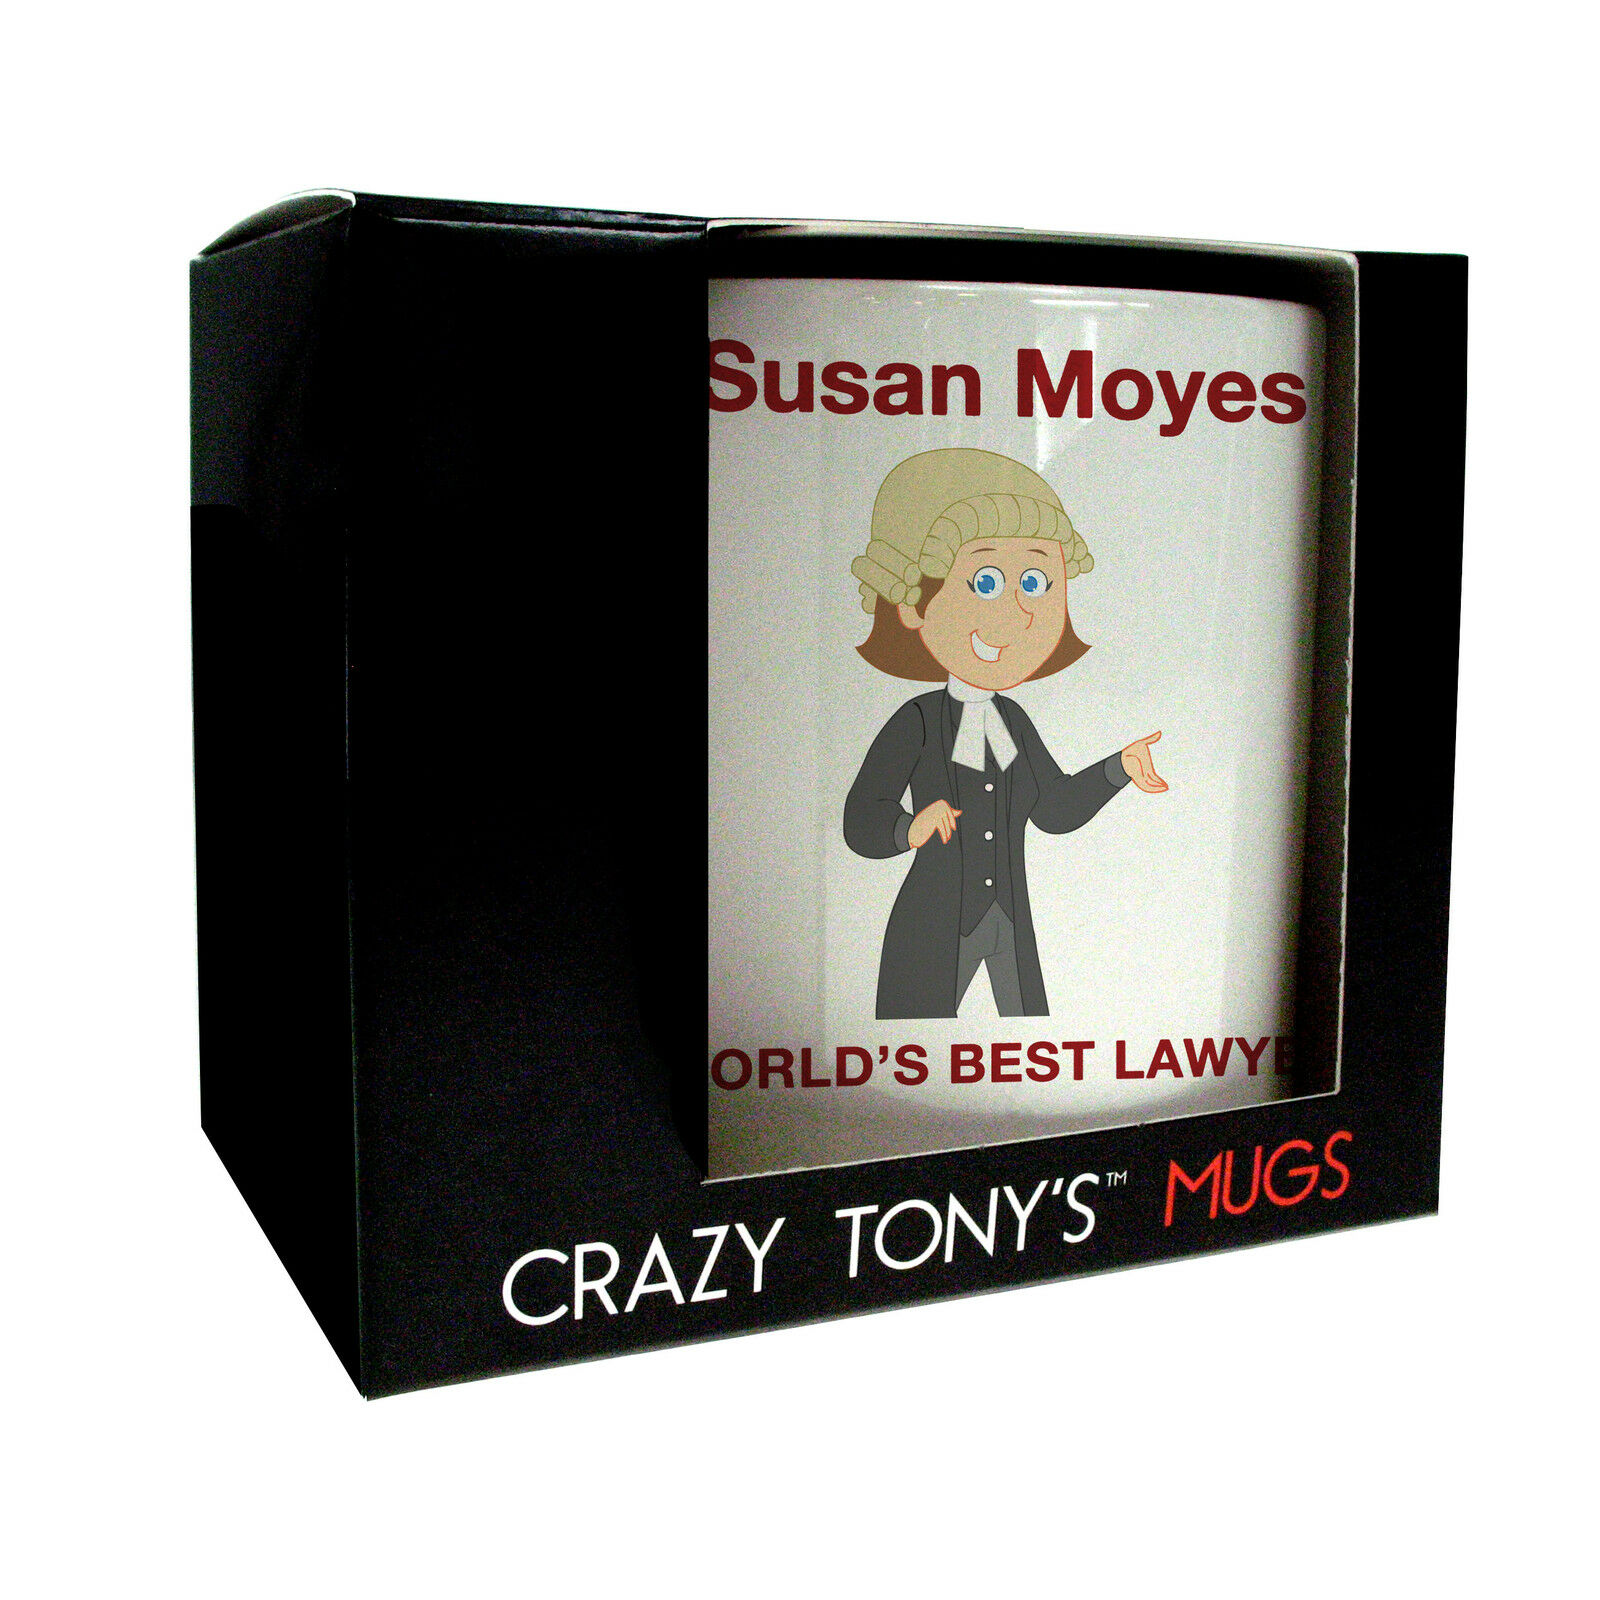 gifts for female lawyers